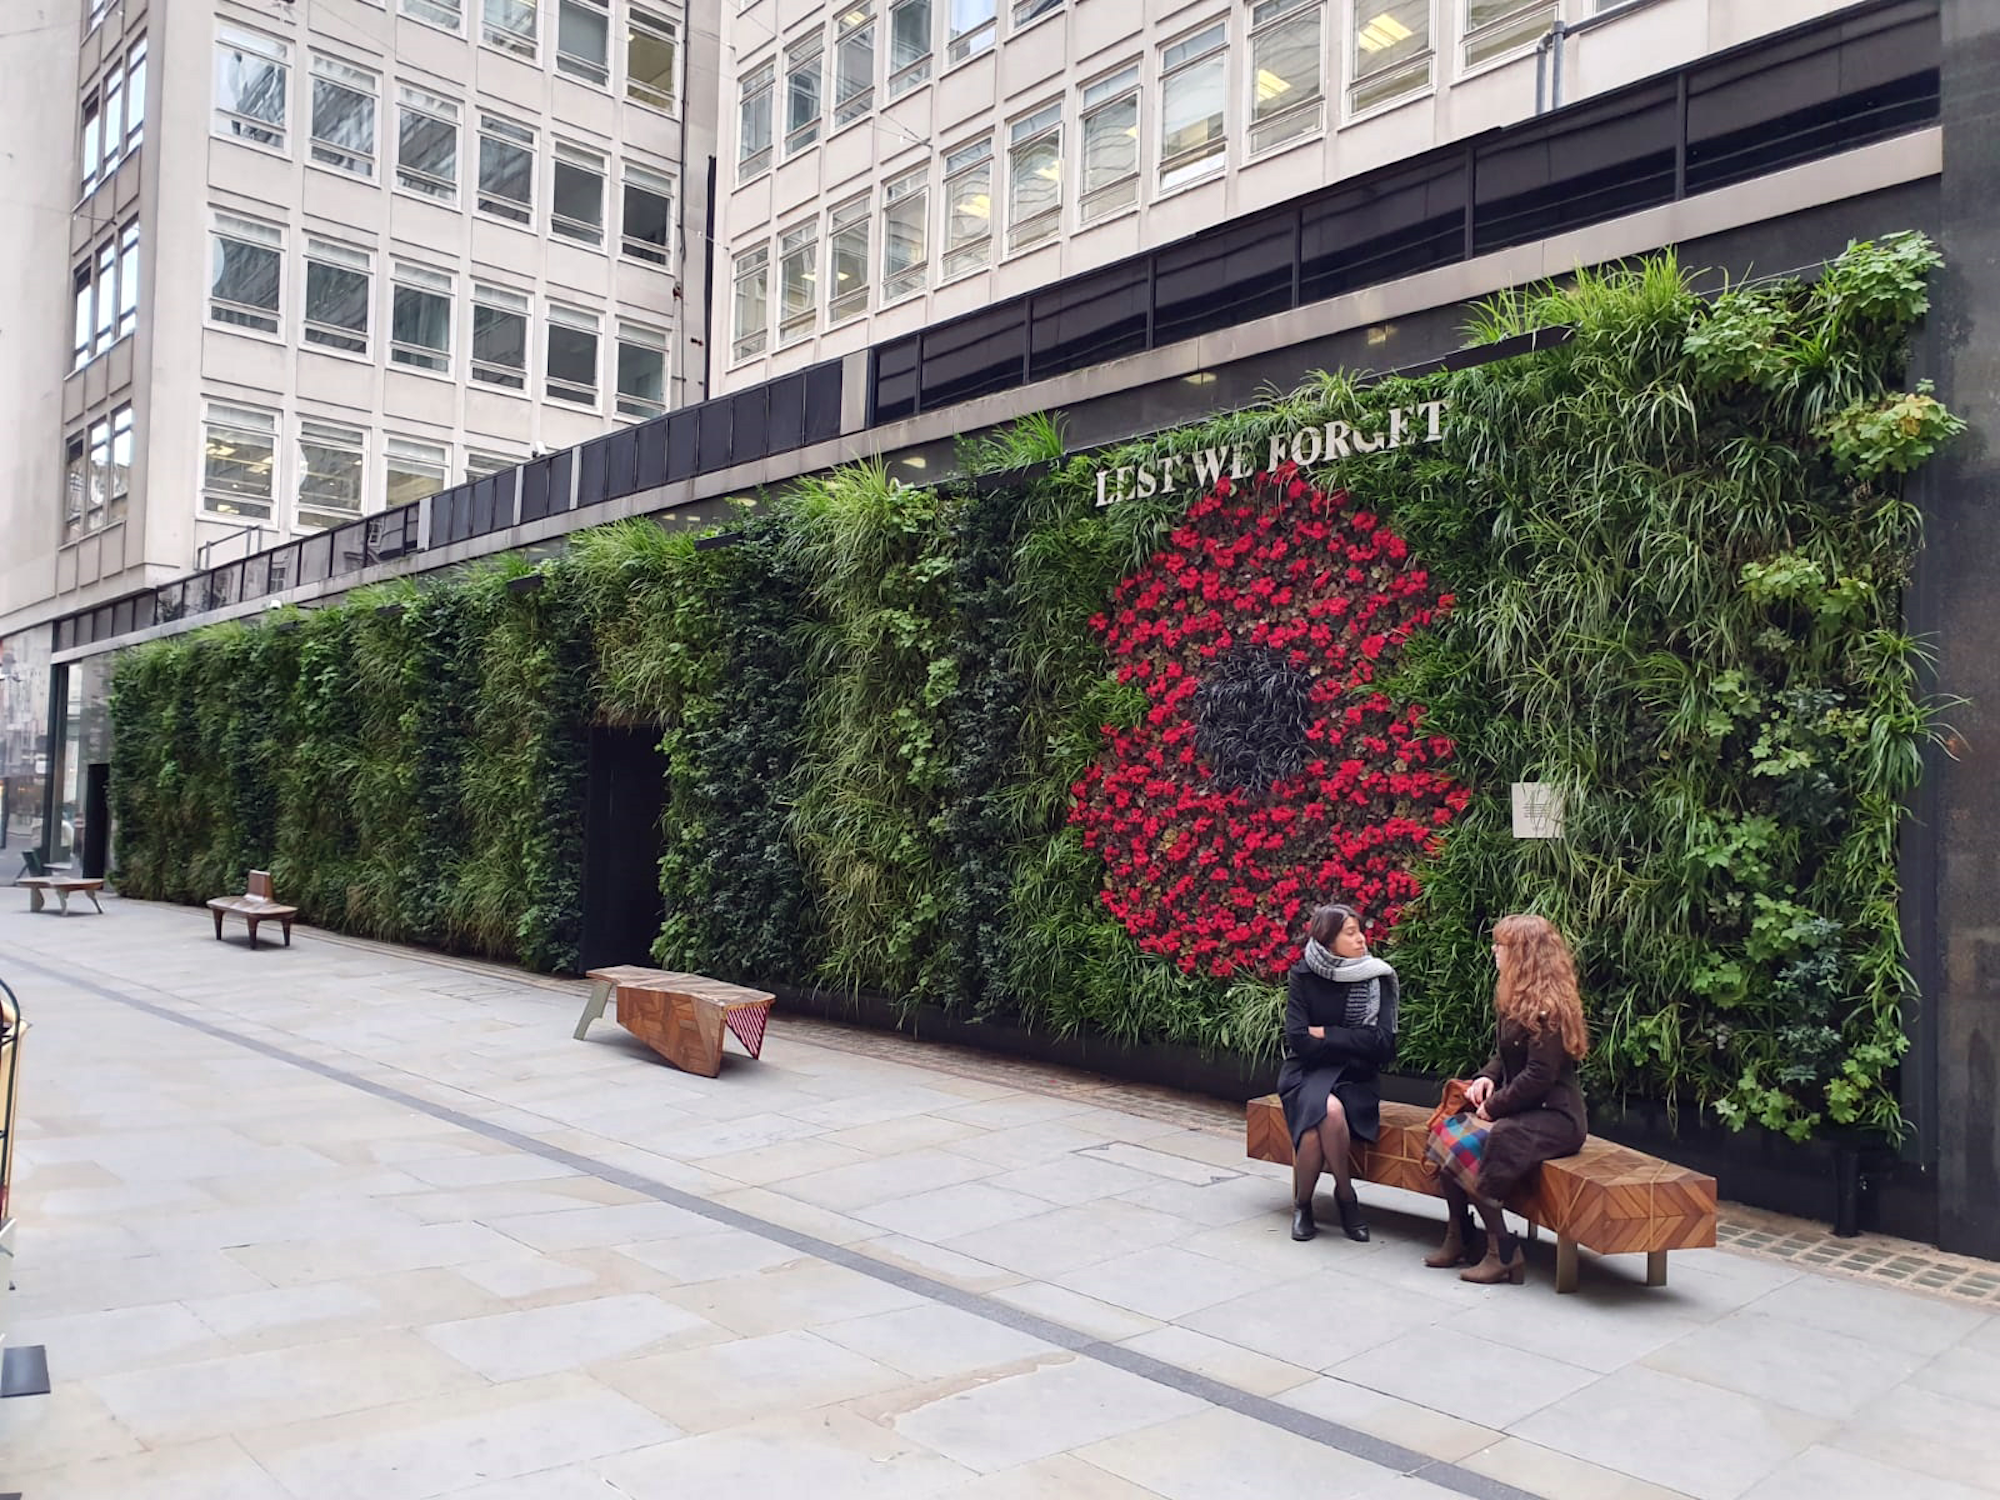 Remembrance Poppy In The Living Wall At St James's Market Pedestrianised Area Created With Red Cyclamens And Heuchera Plants